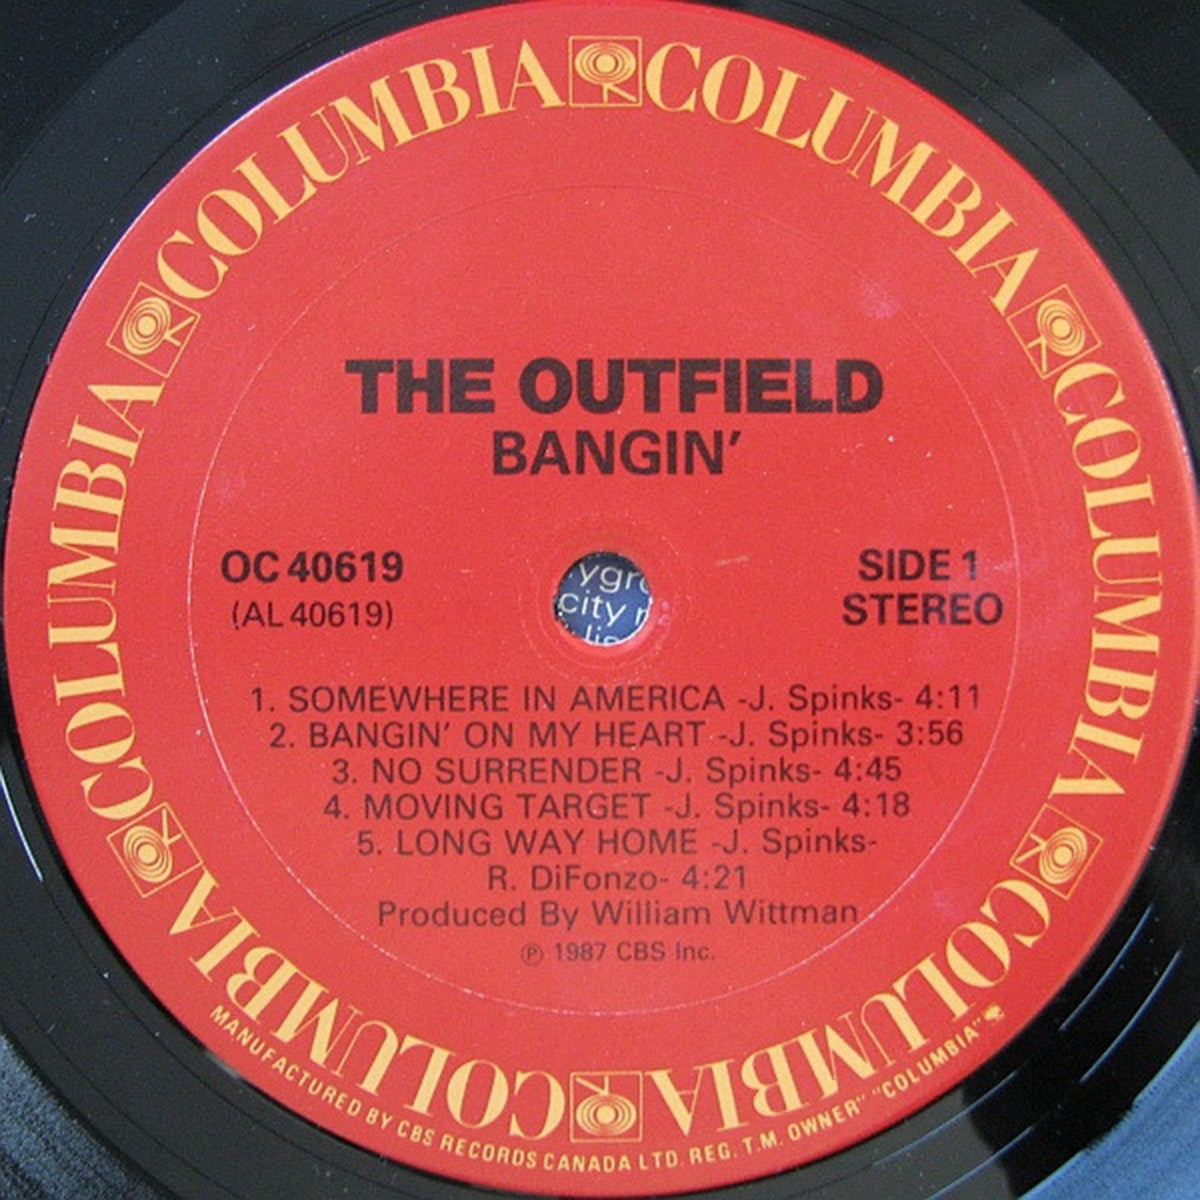 The Outfield – Bangin' - 1987